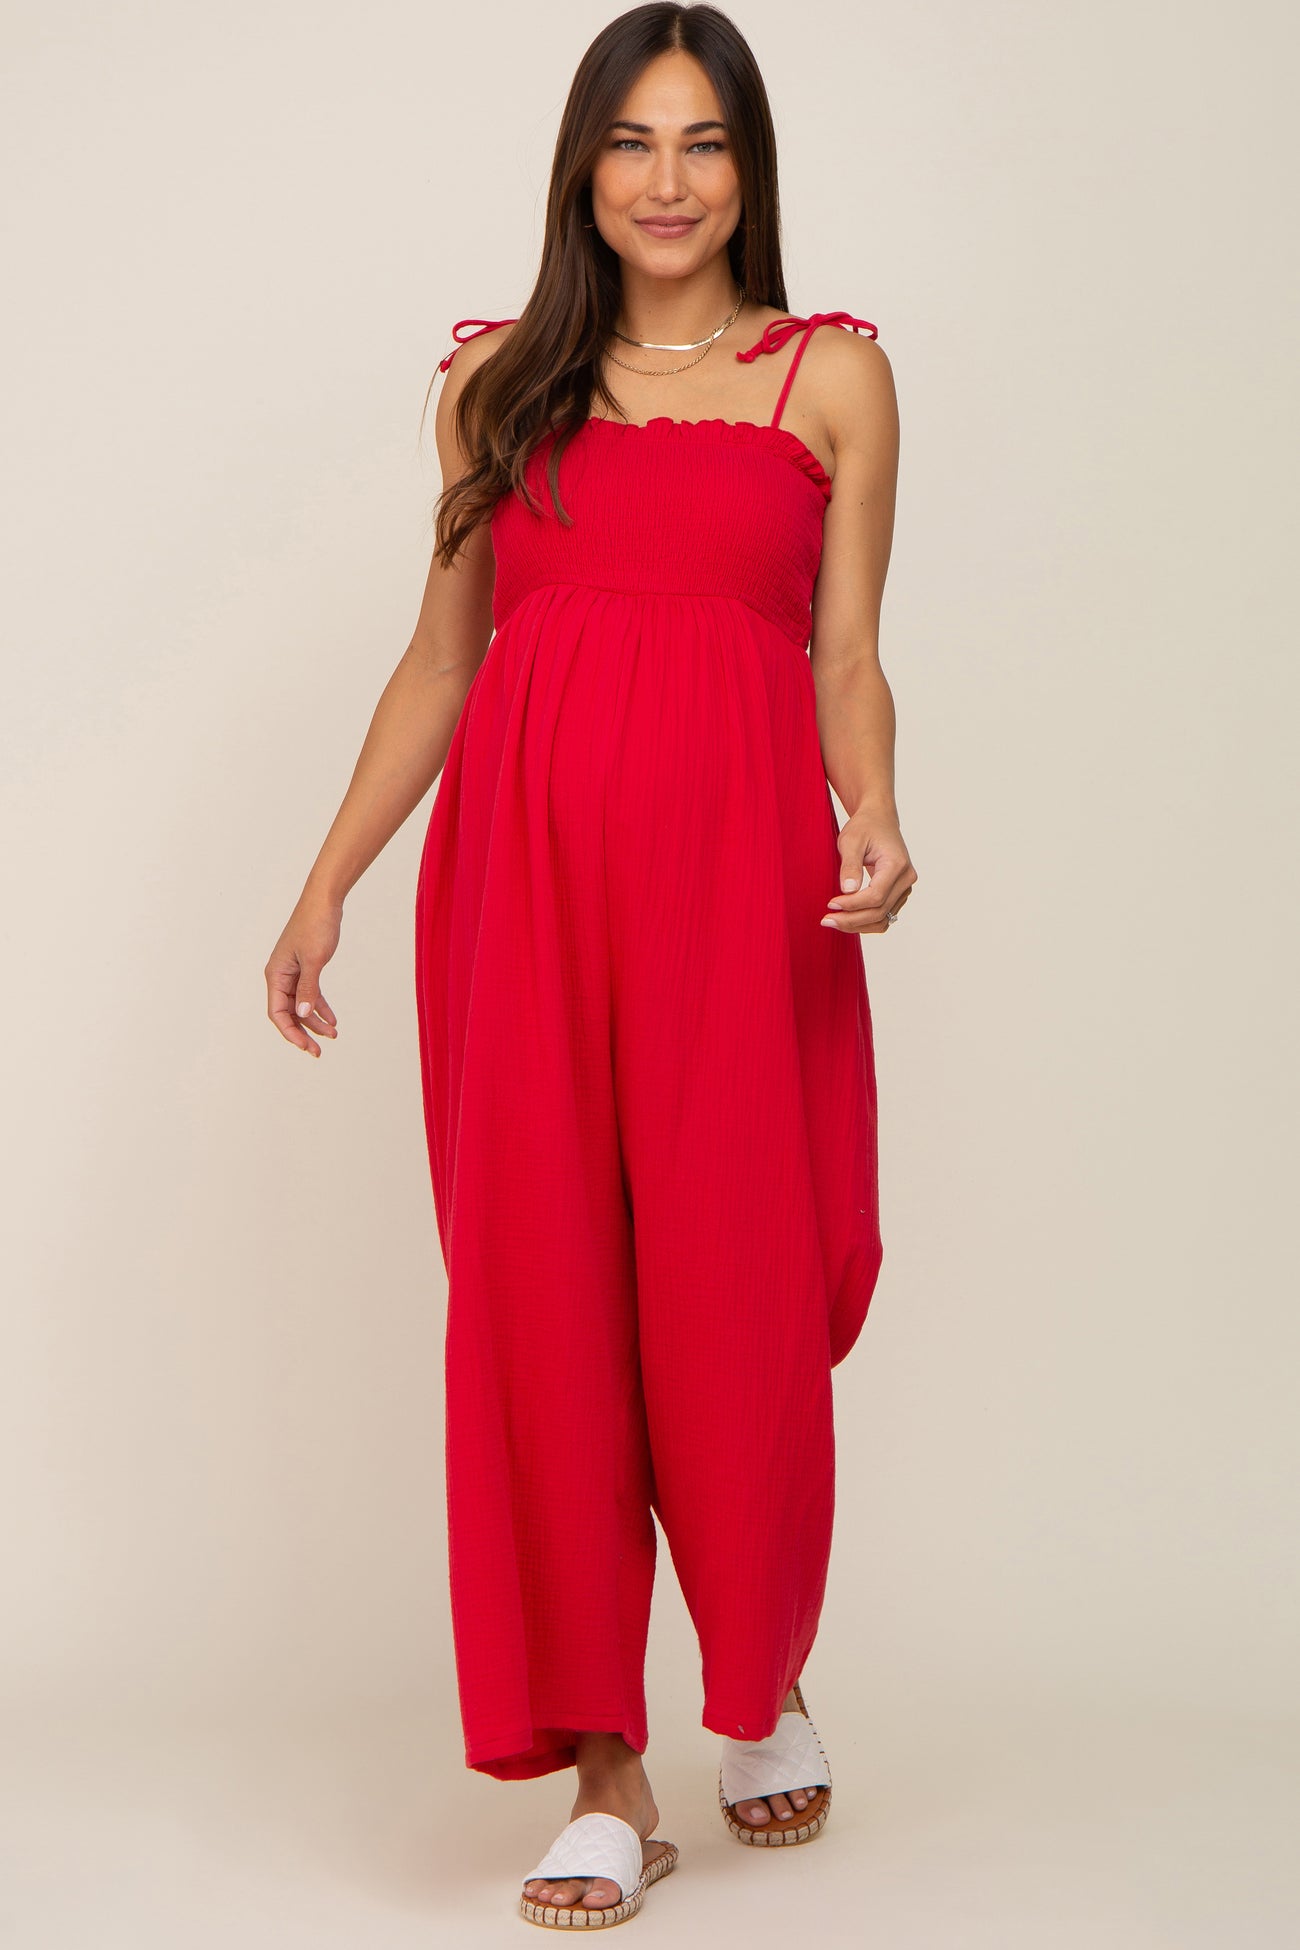 The Nines by HATCH 3/4 Sleeve Button-Front Maternity Jumpsuit Wine Red  Small | eBay